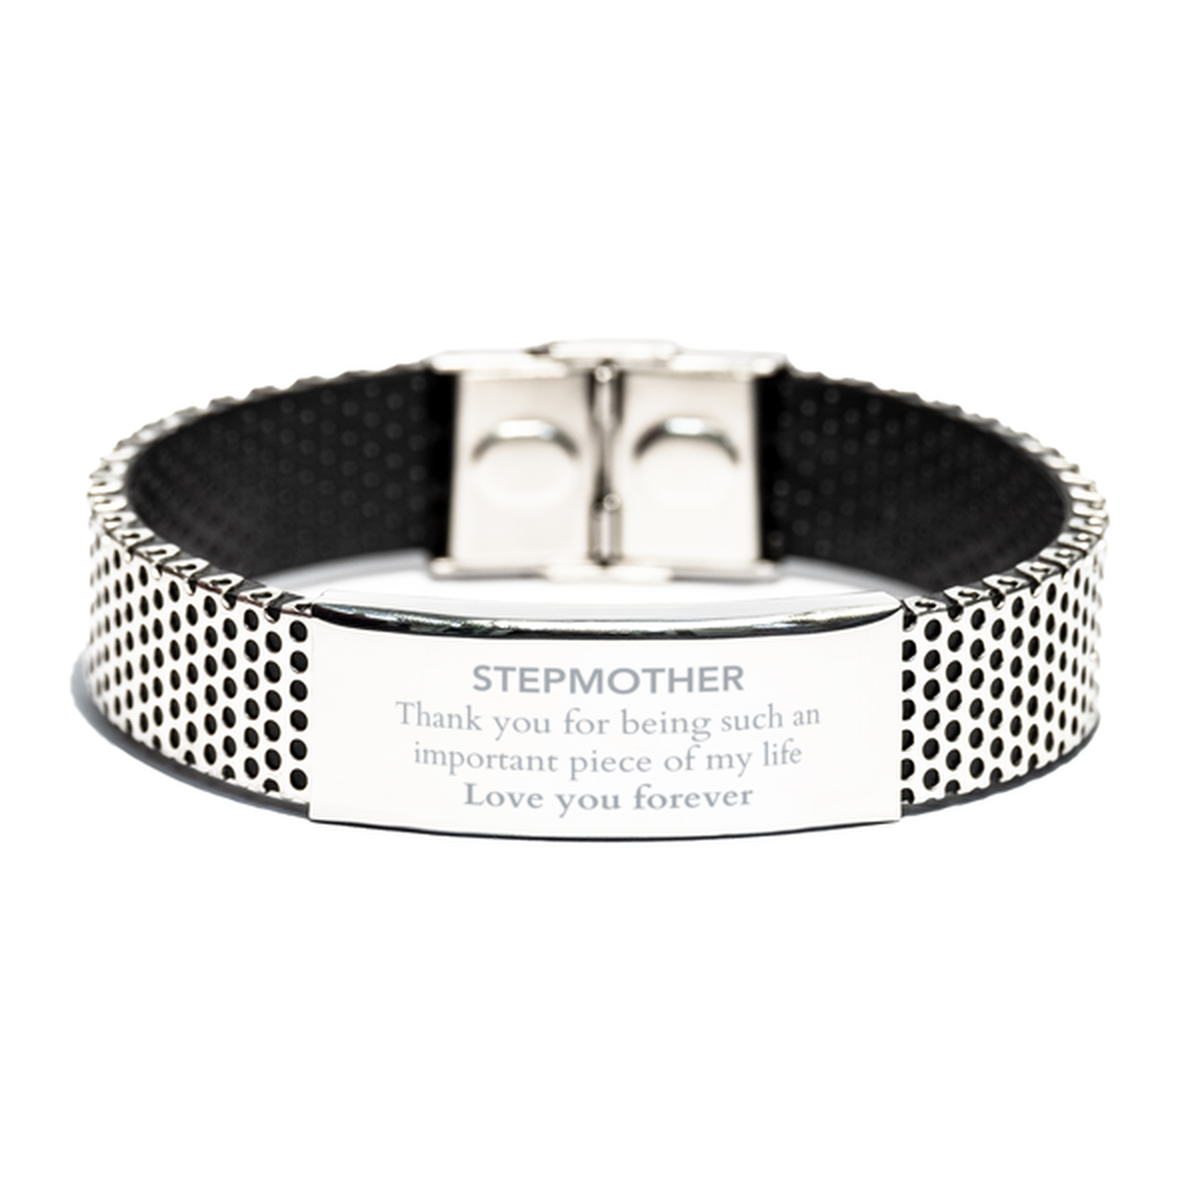 Appropriate Stepmother Stainless Steel Bracelet Epic Birthday Gifts for Stepmother Thank you for being such an important piece of my life Stepmother Christmas Mothers Fathers Day